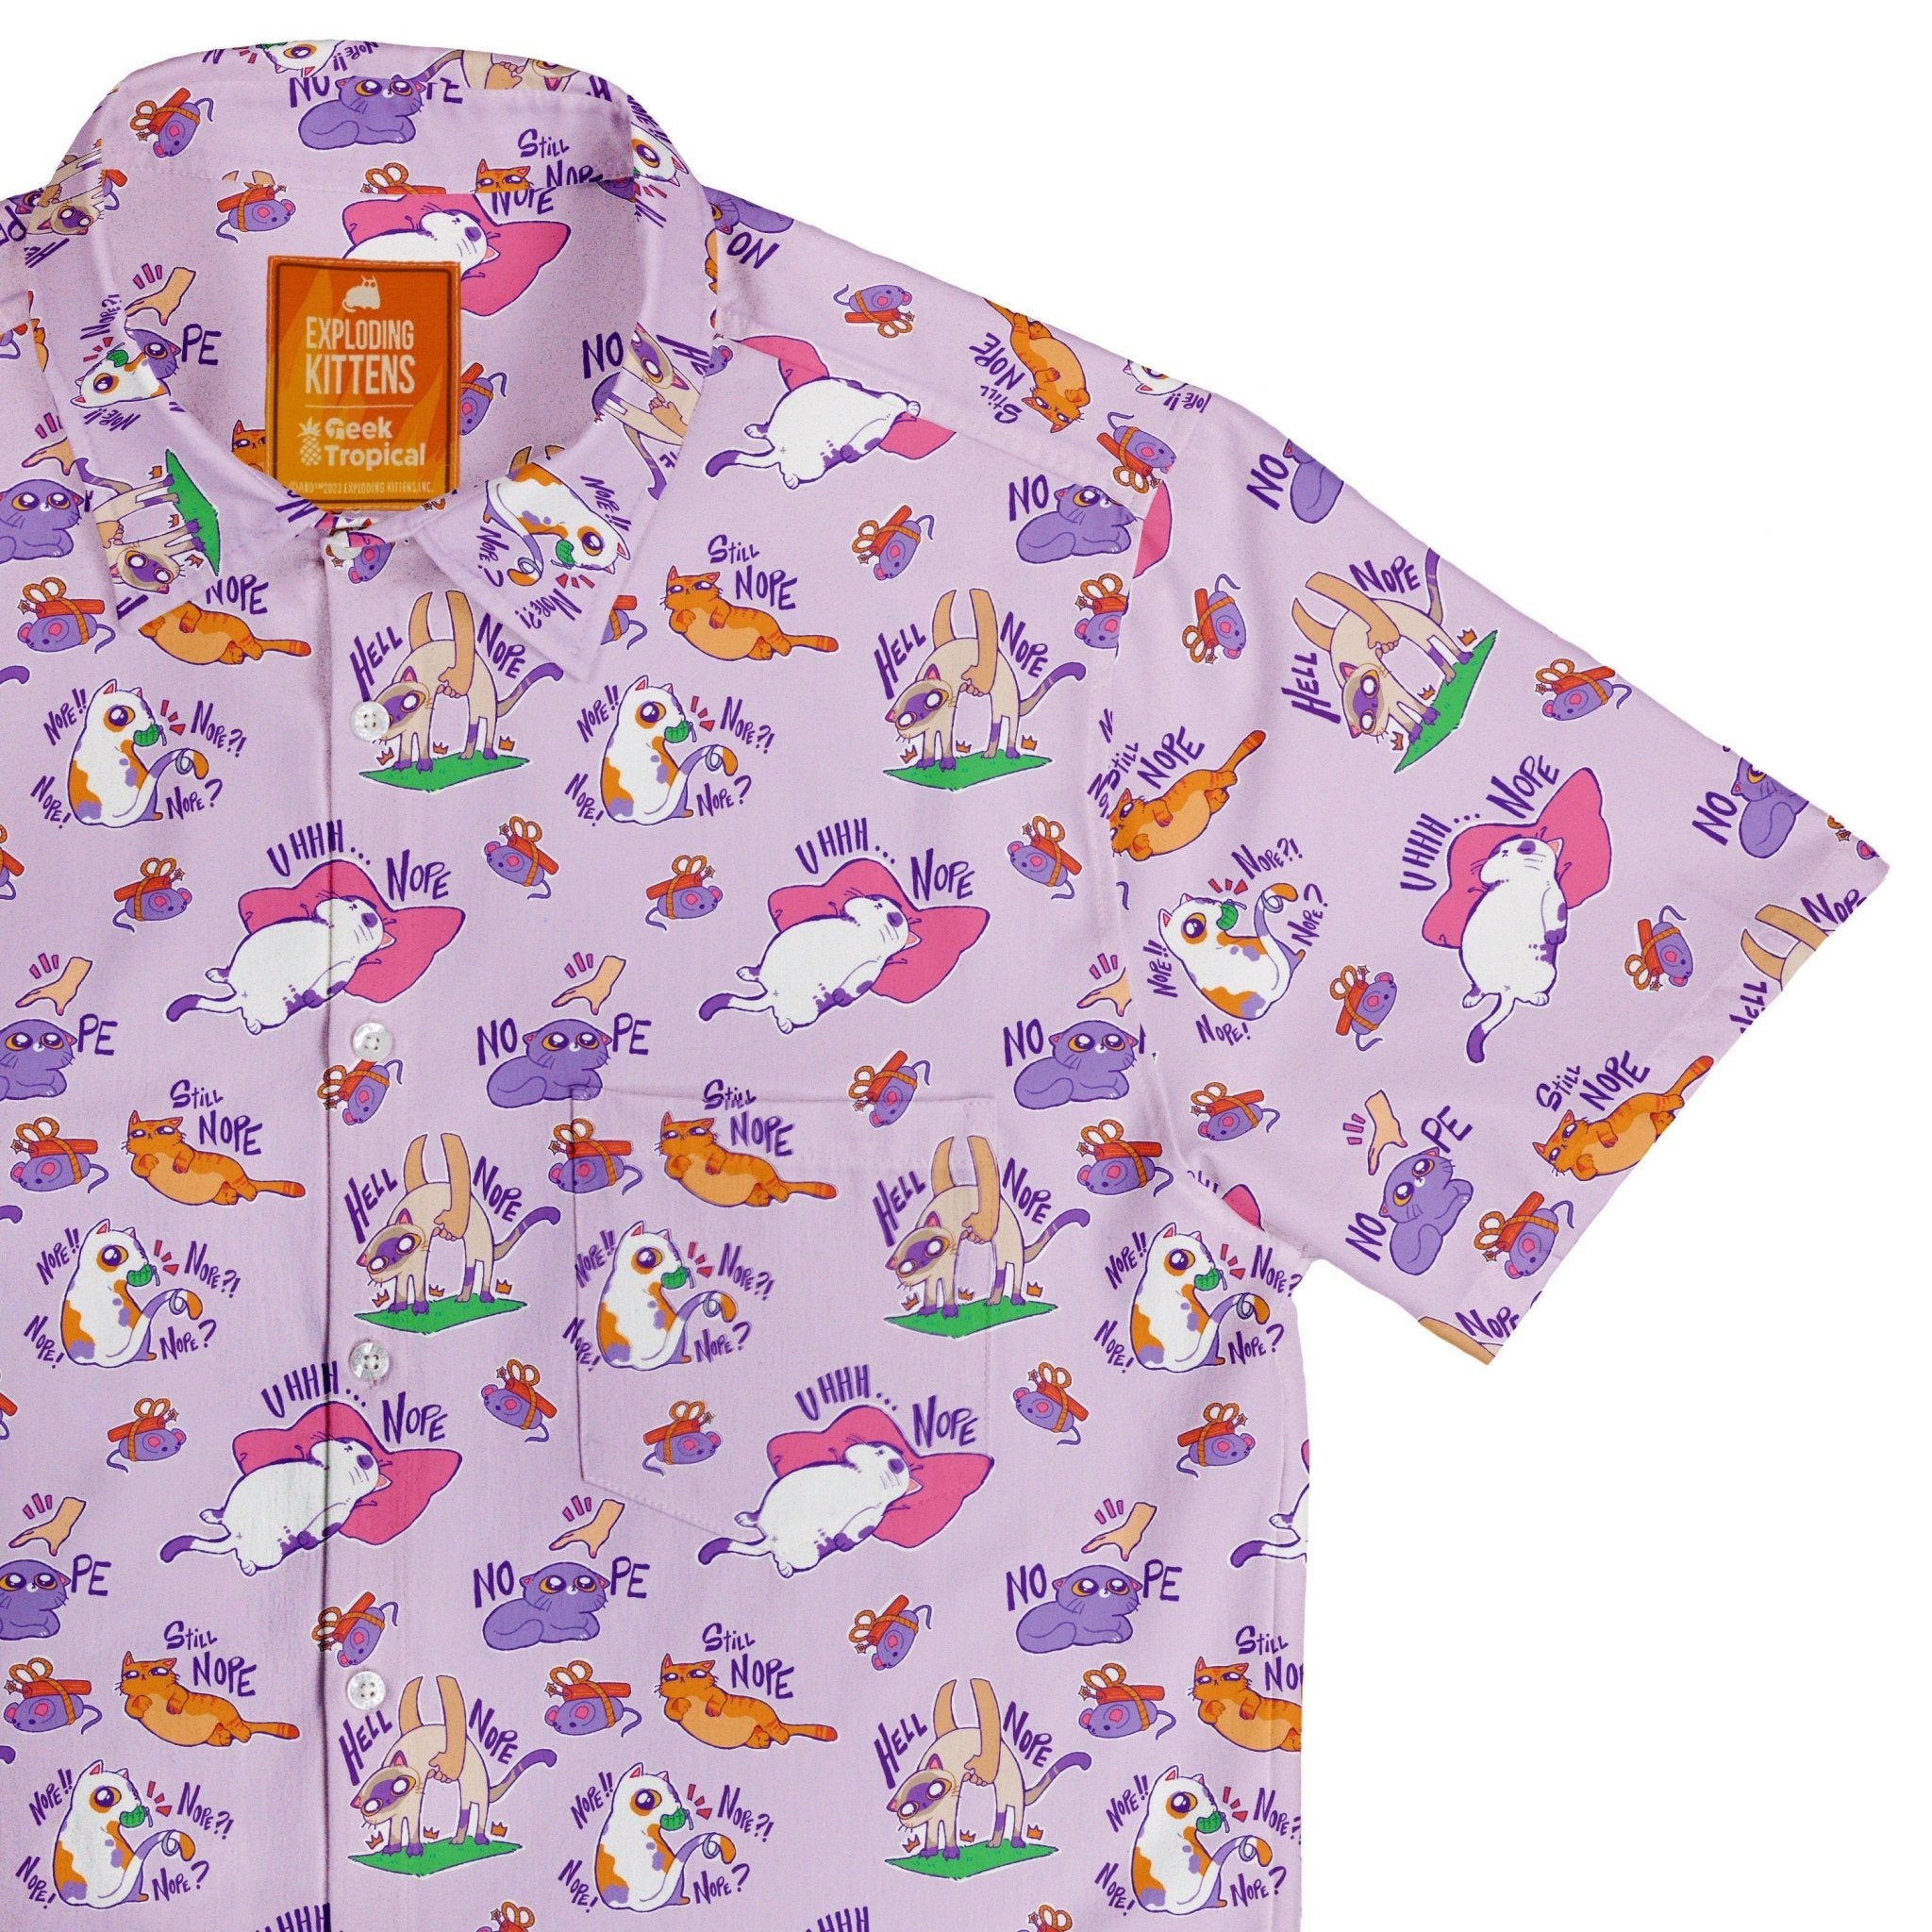 Exploding Kittens Sassy Nope Button Up Shirt - adult sizing - Animal Patterns - board game print